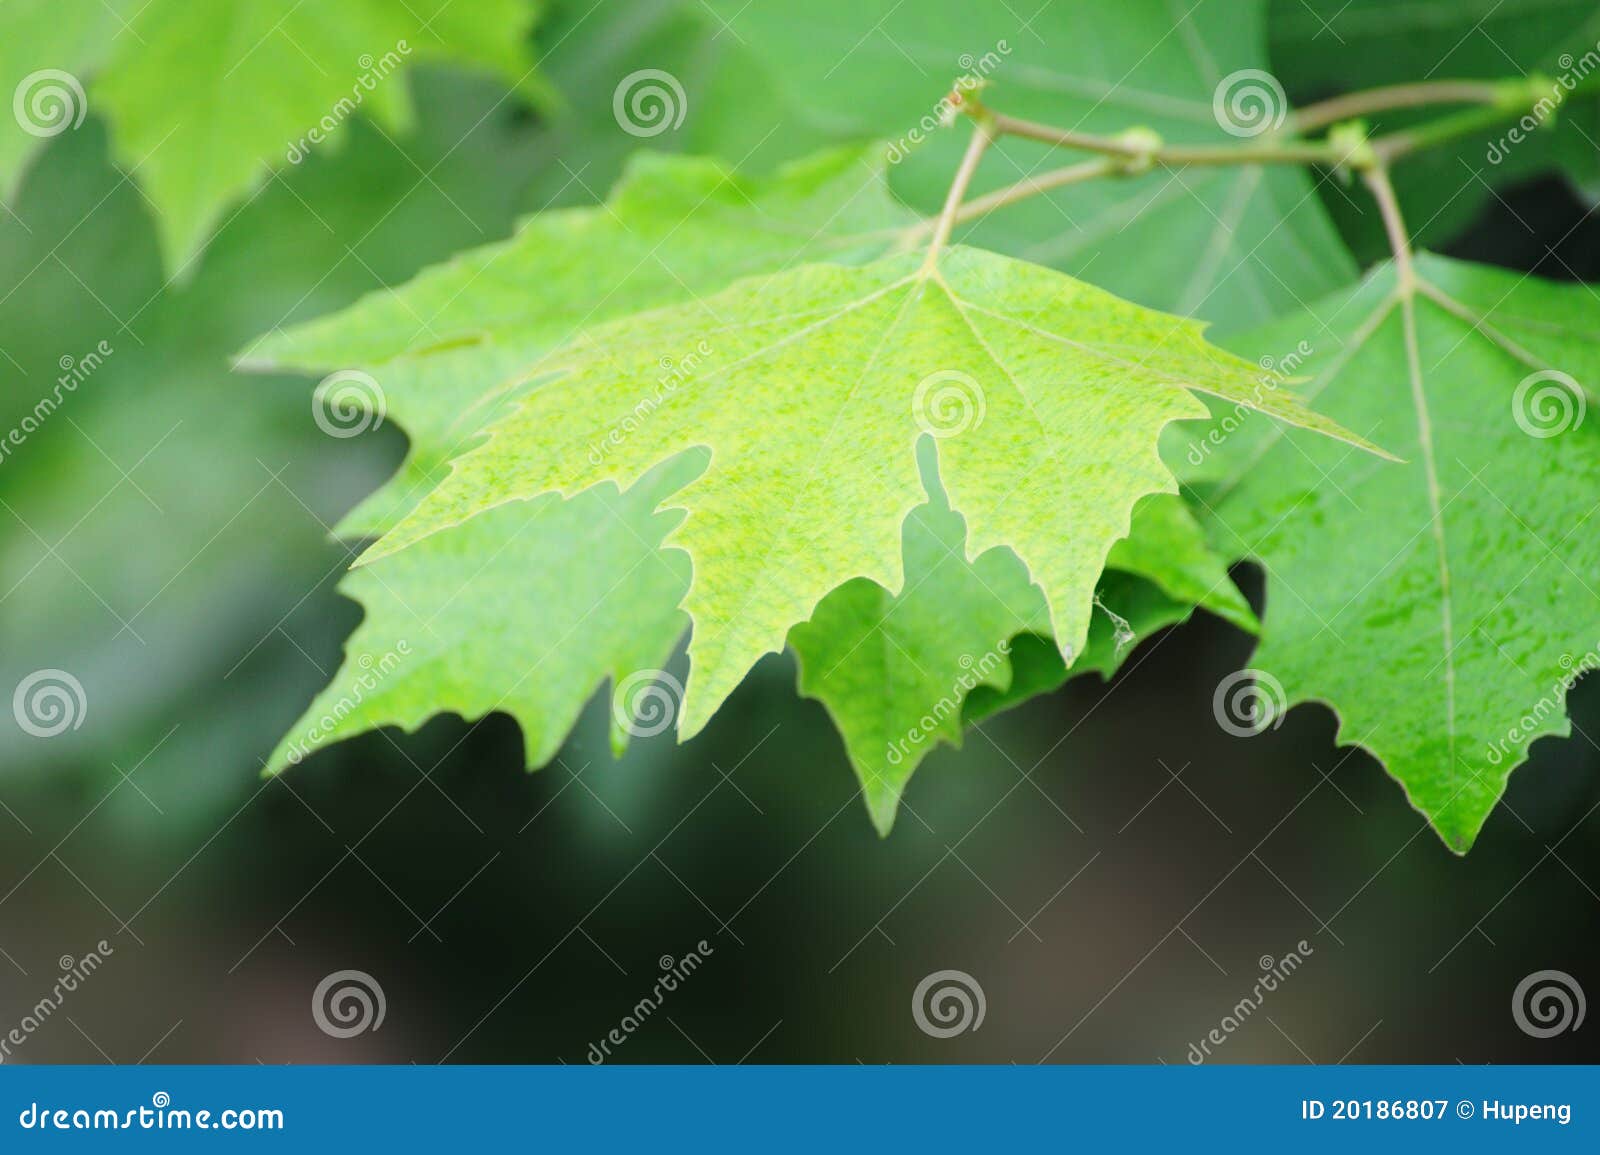 Summer Indus Leaves Background Stock Image - Image of grapes, lush ...